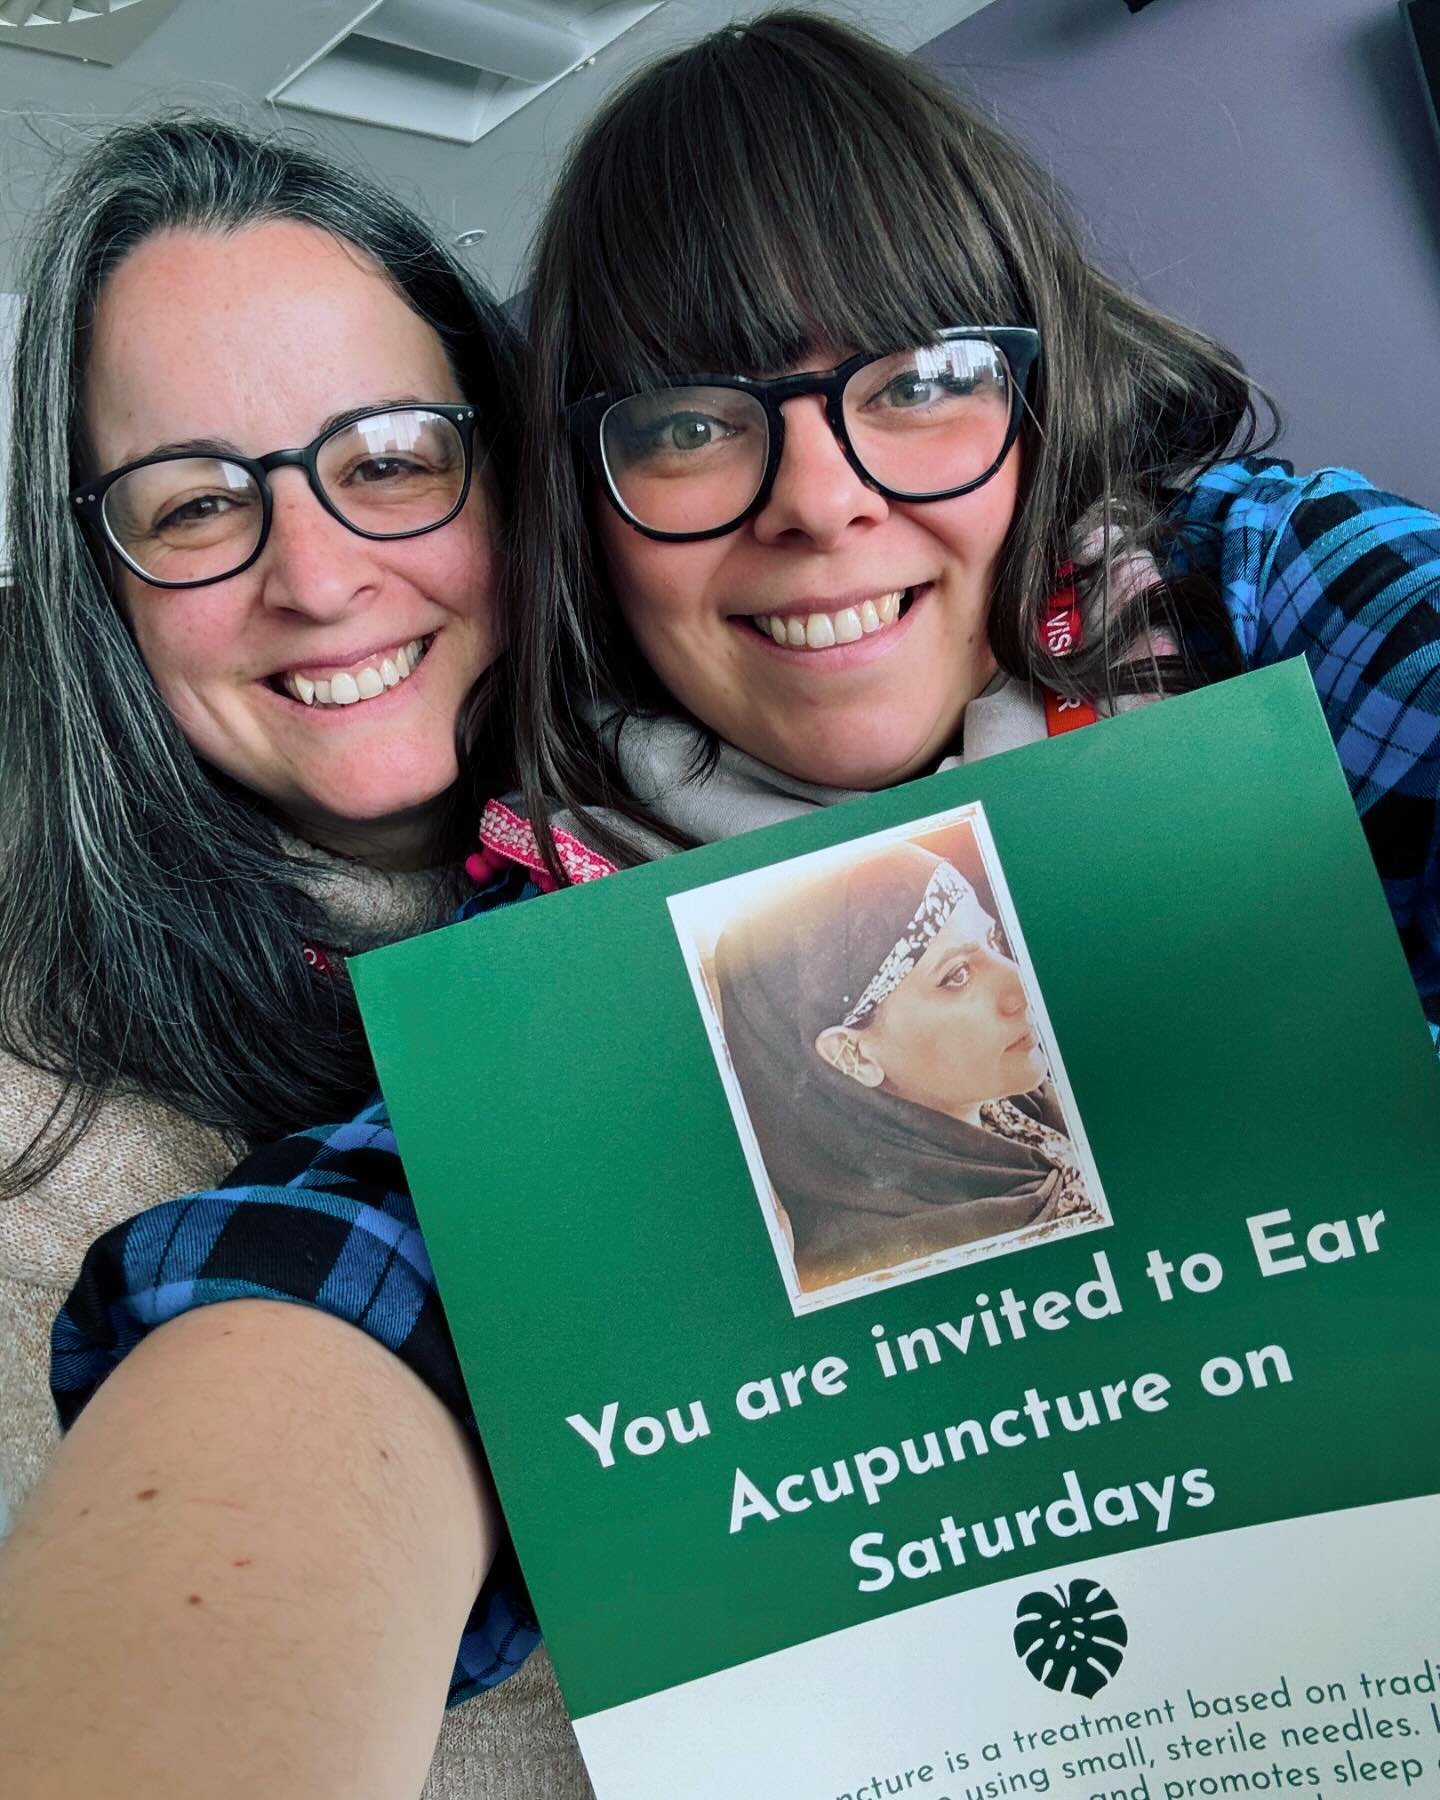 ✧ E A R  A C U P U N C T U R E ✧

Had a great morning volunteering with @florence_diazz providing auricular acupuncture for refugees. 

We use the NADA protocol during these volunteering sessions which includes the inversion of five needles bilateral